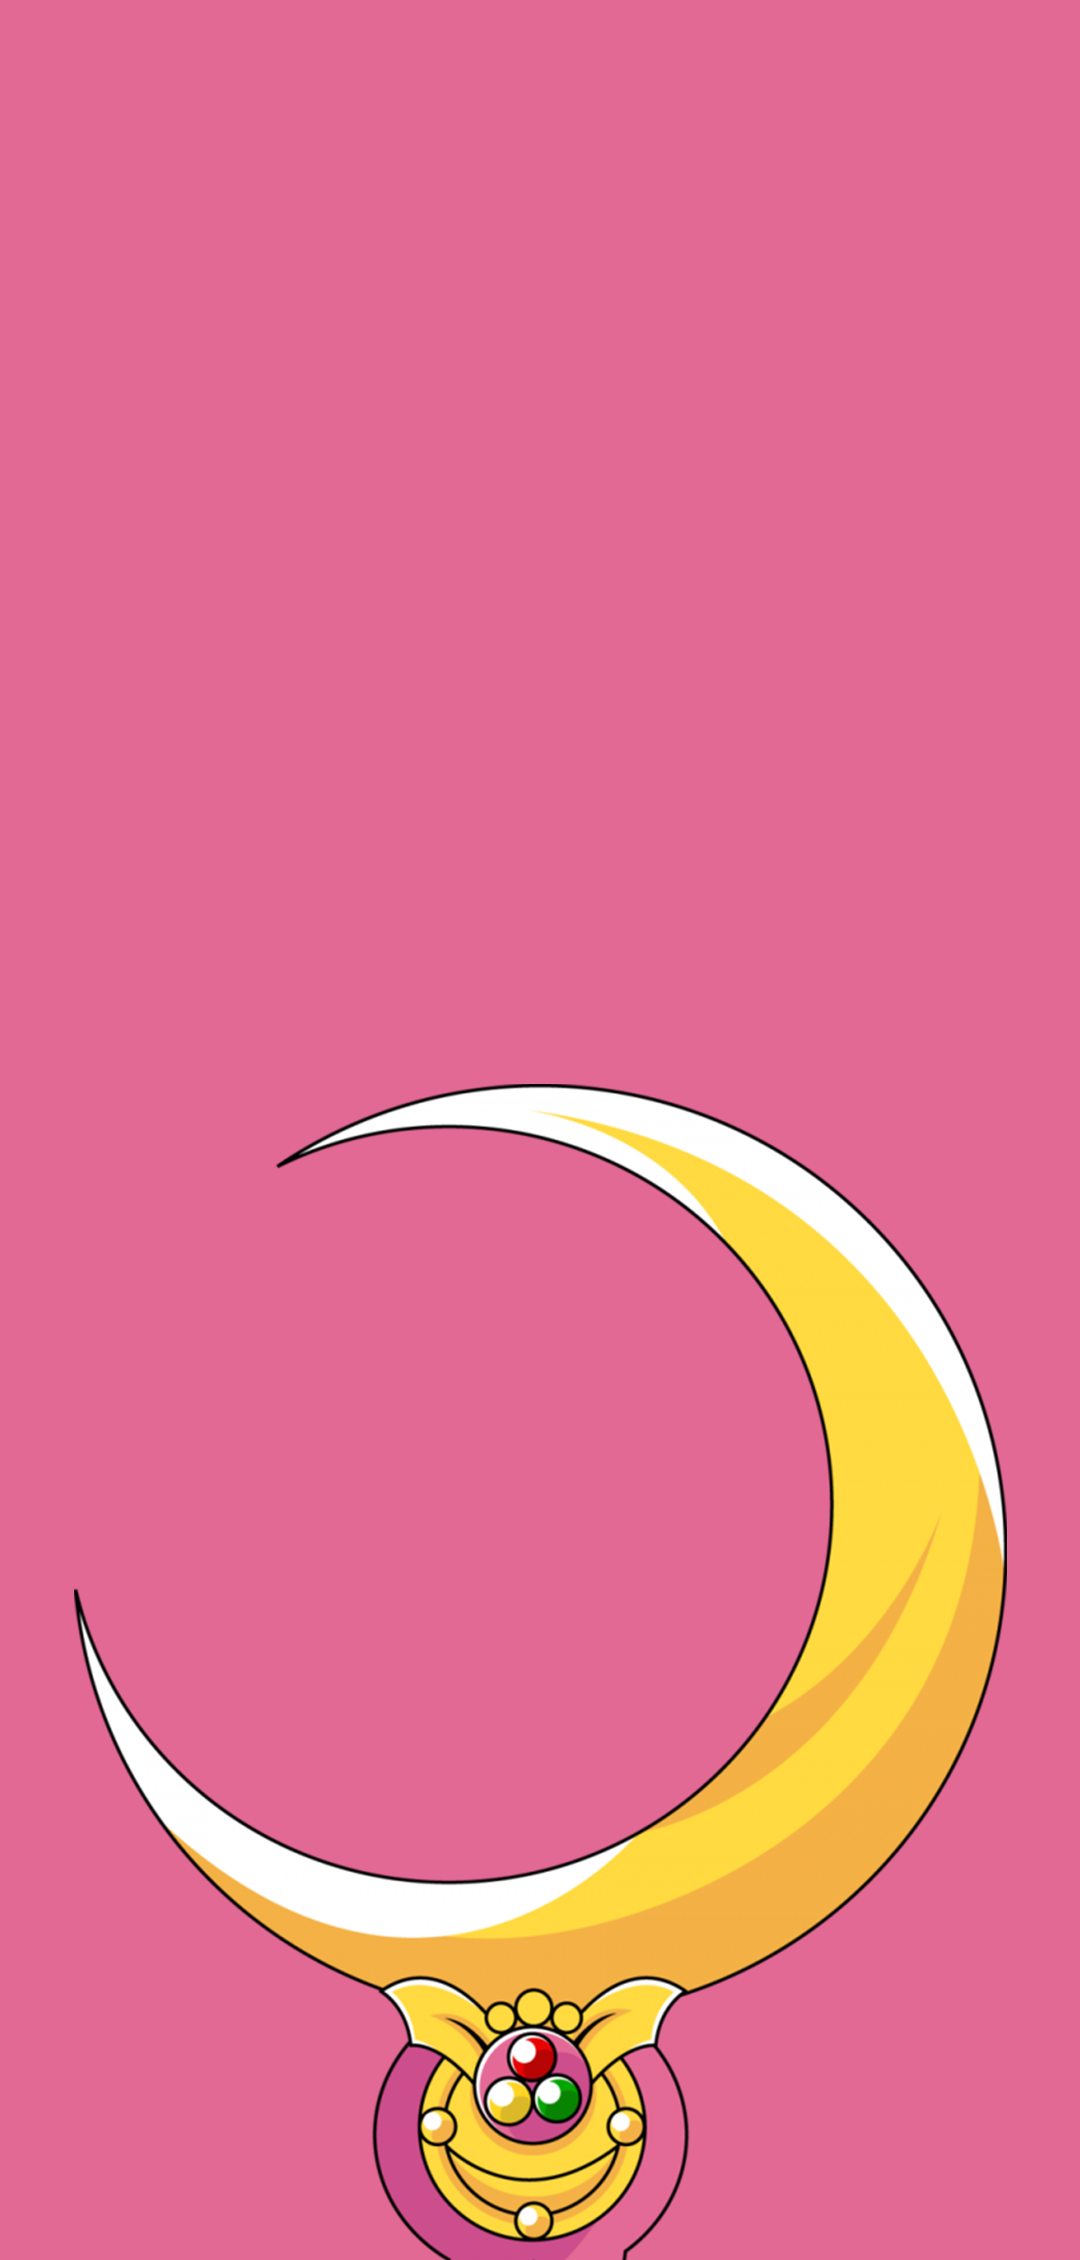 General 1080x2260 pink portrait display Moon crescent moon minimalism simple background pink background anime